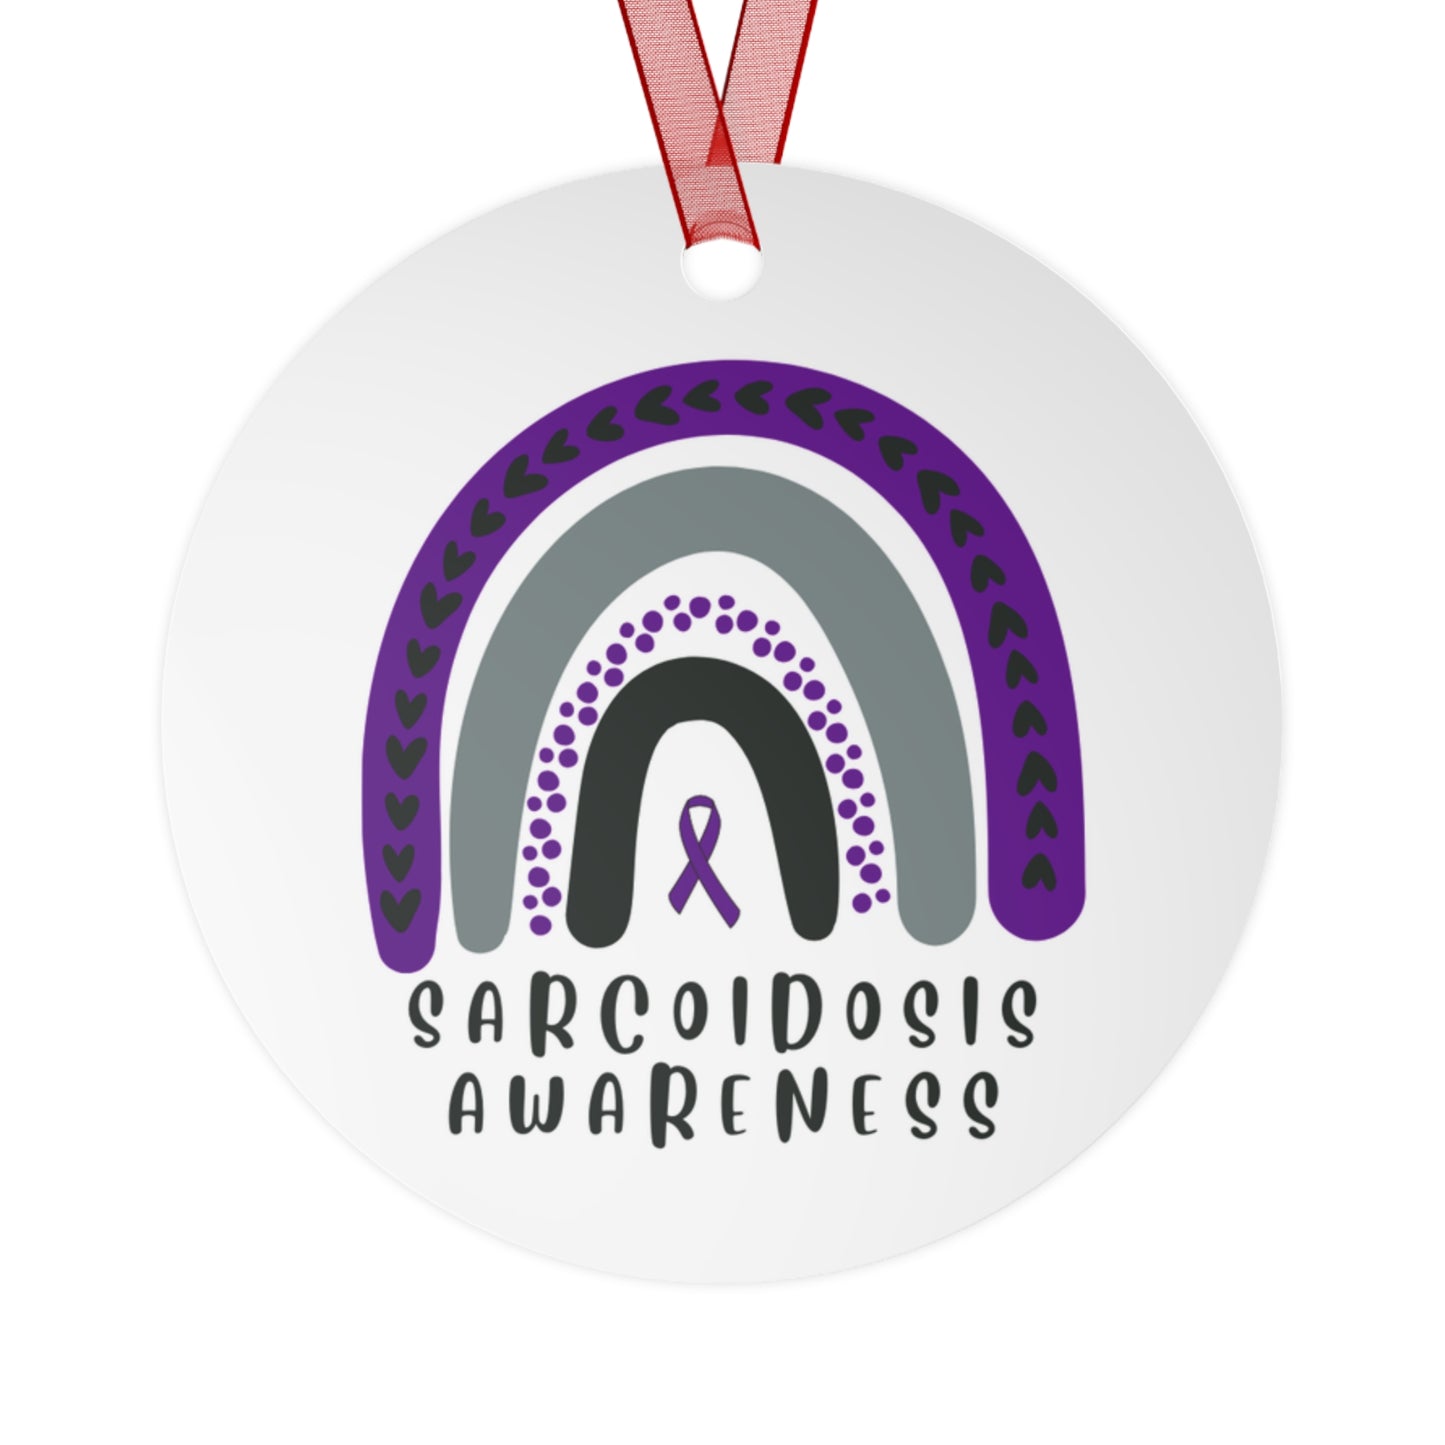 Sarcoidosis Awareness Christmas Ornament Stocking Stuffer Christmas Gift, Holiday Home Decor, Wall Hanging, Support for Frien